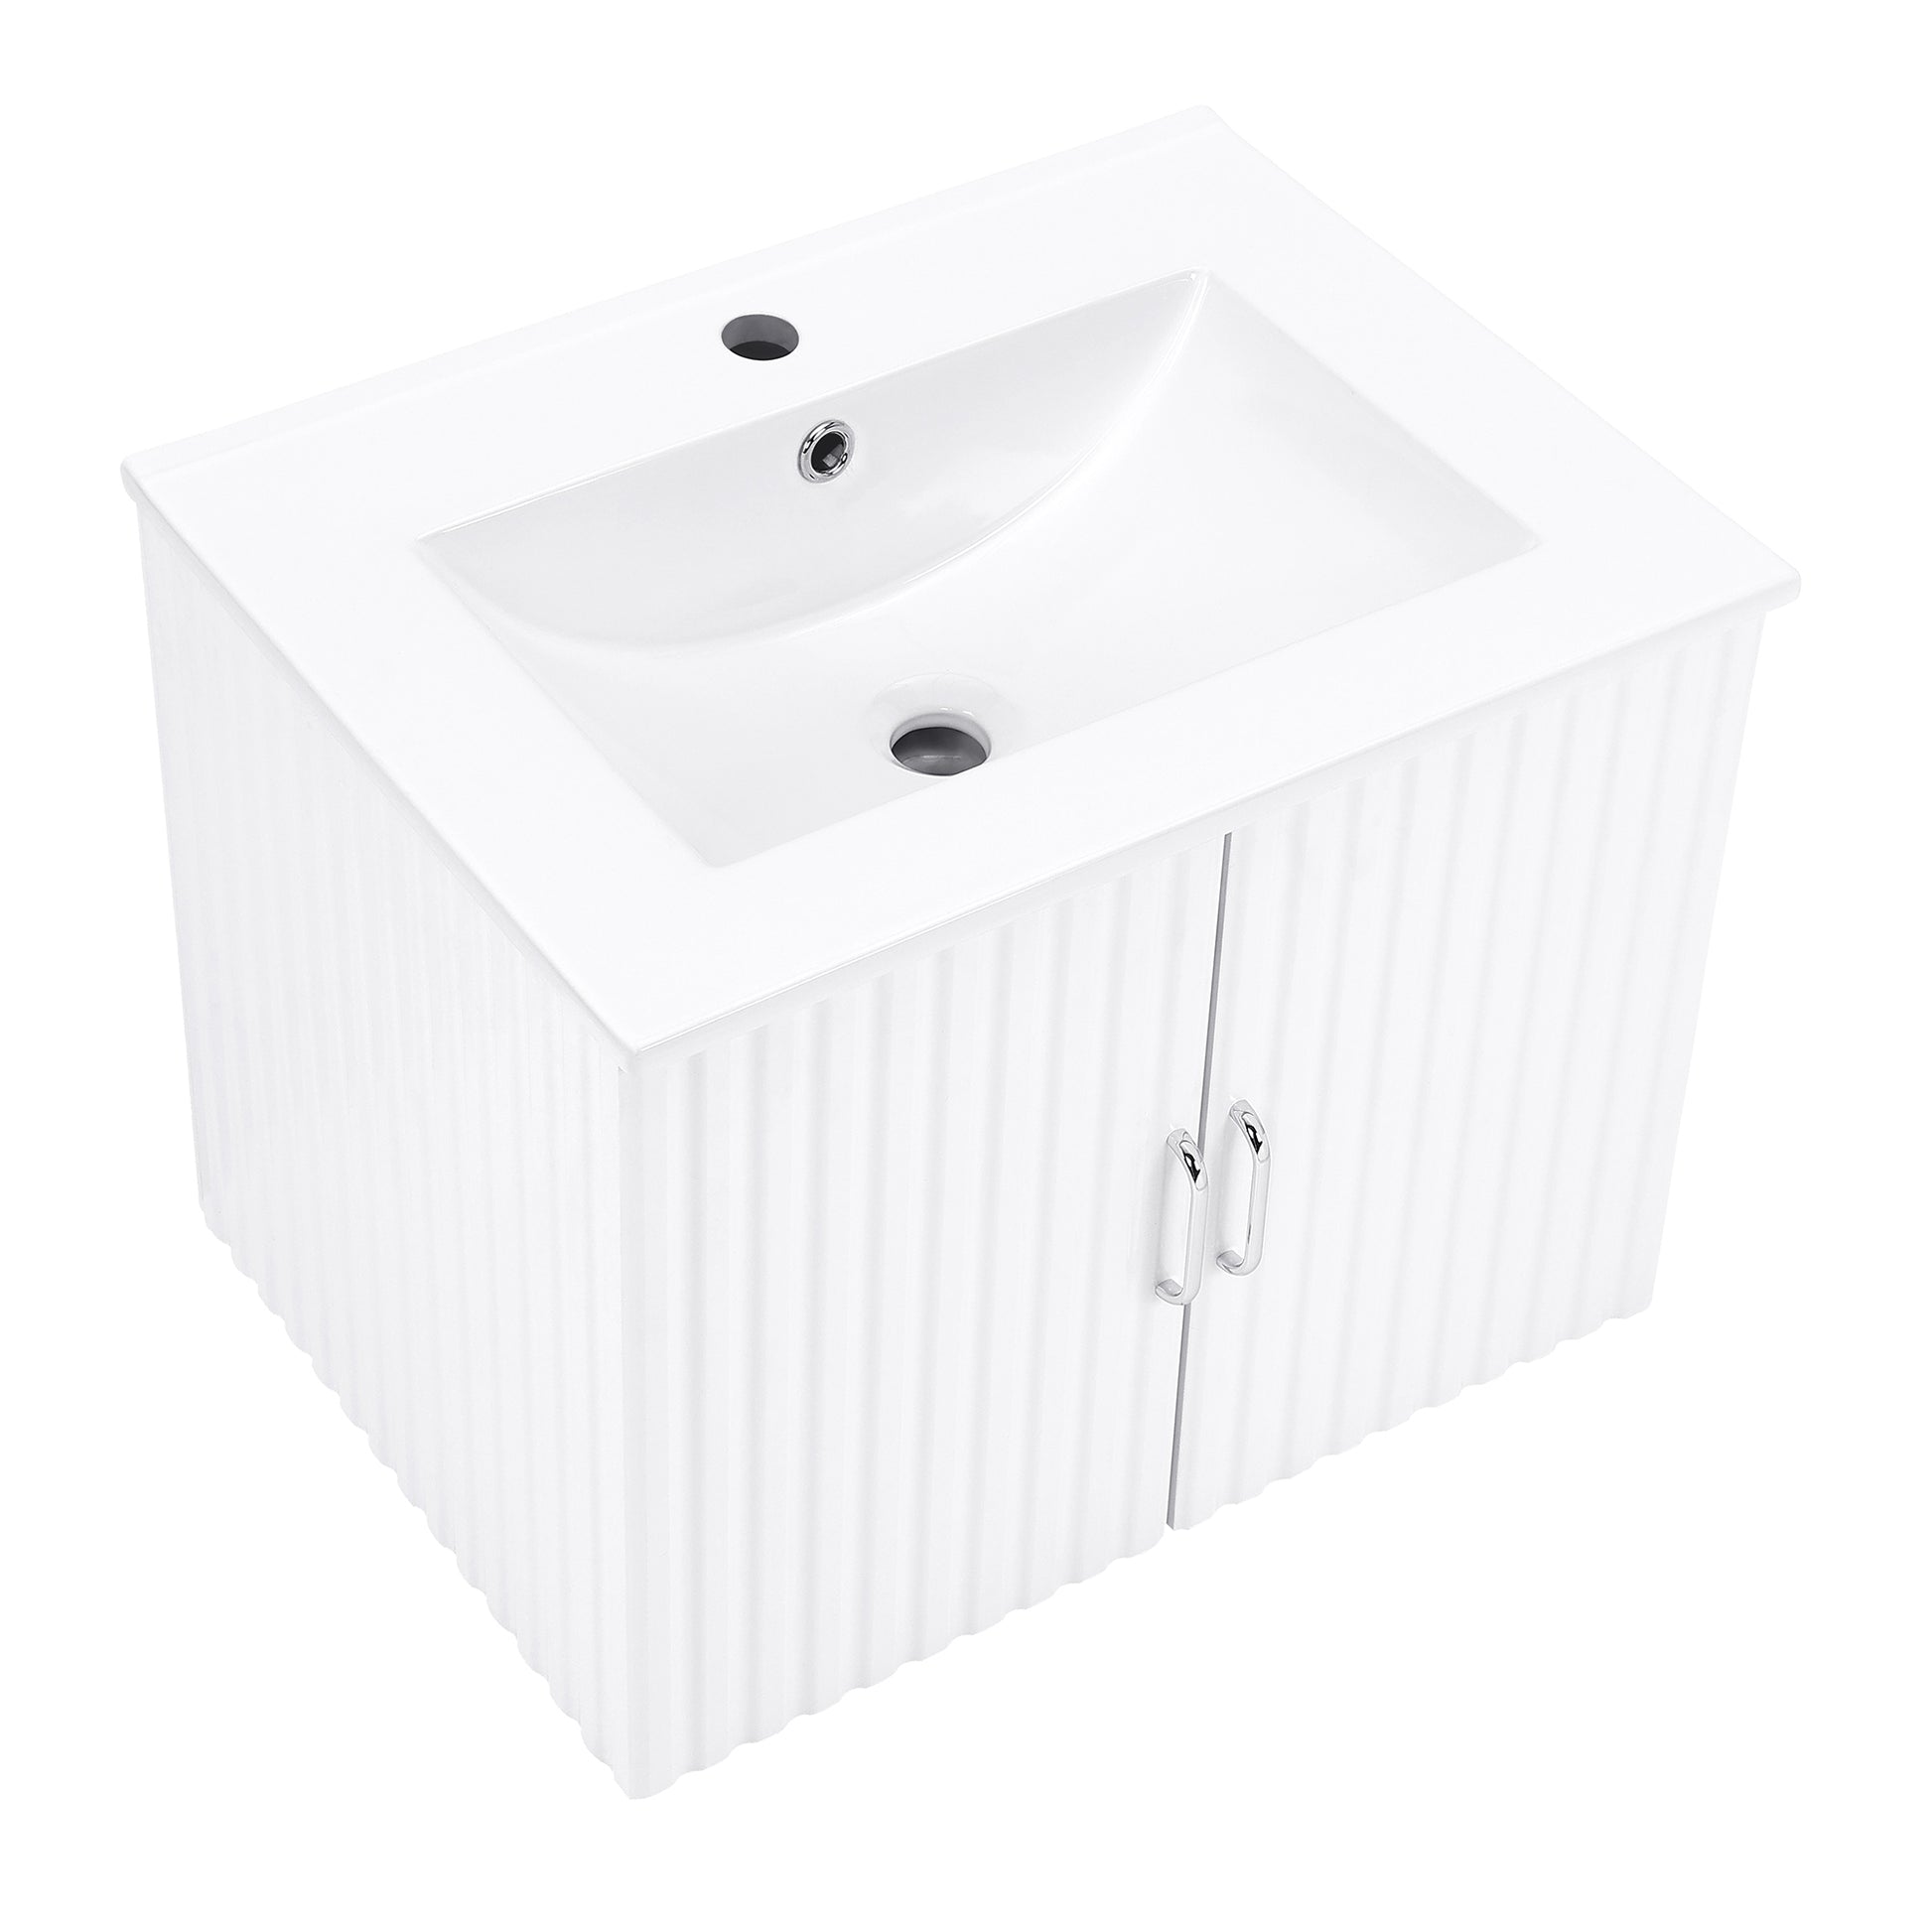 24" Floating Wall Mounted Bathroom Vanity with White white-ceramic+mdf